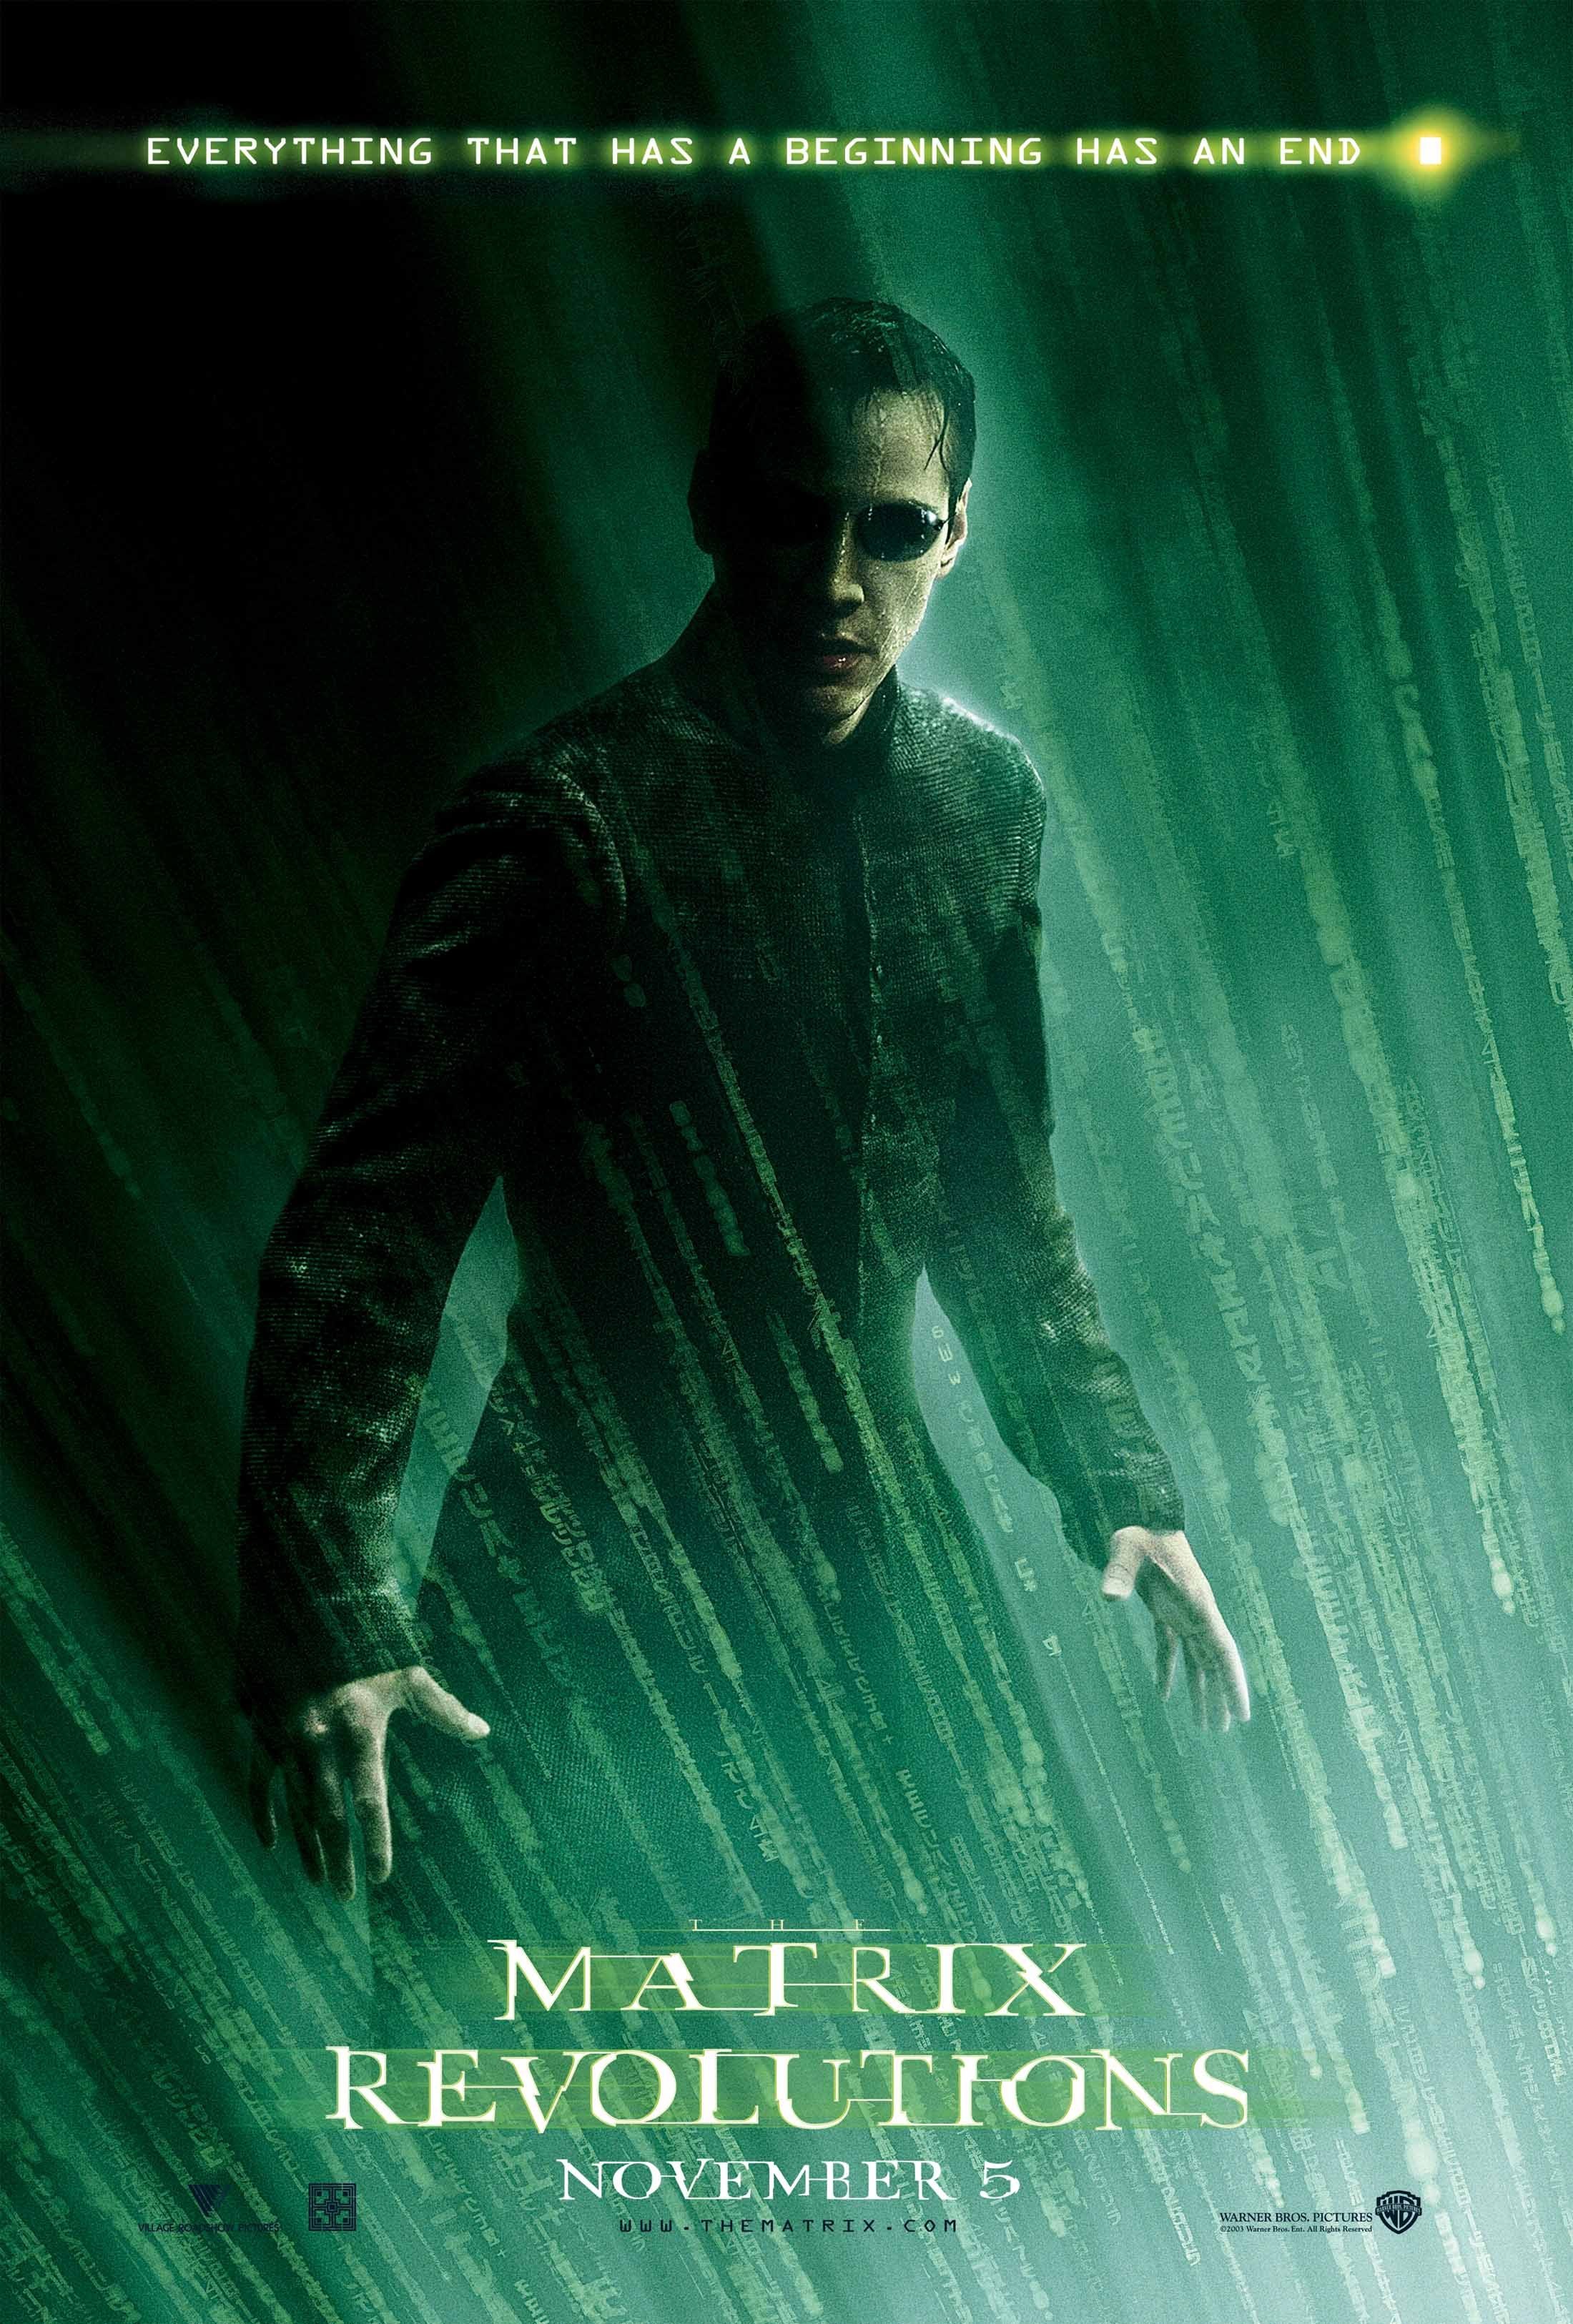 Poster Of Matrix Movie Wallpapers